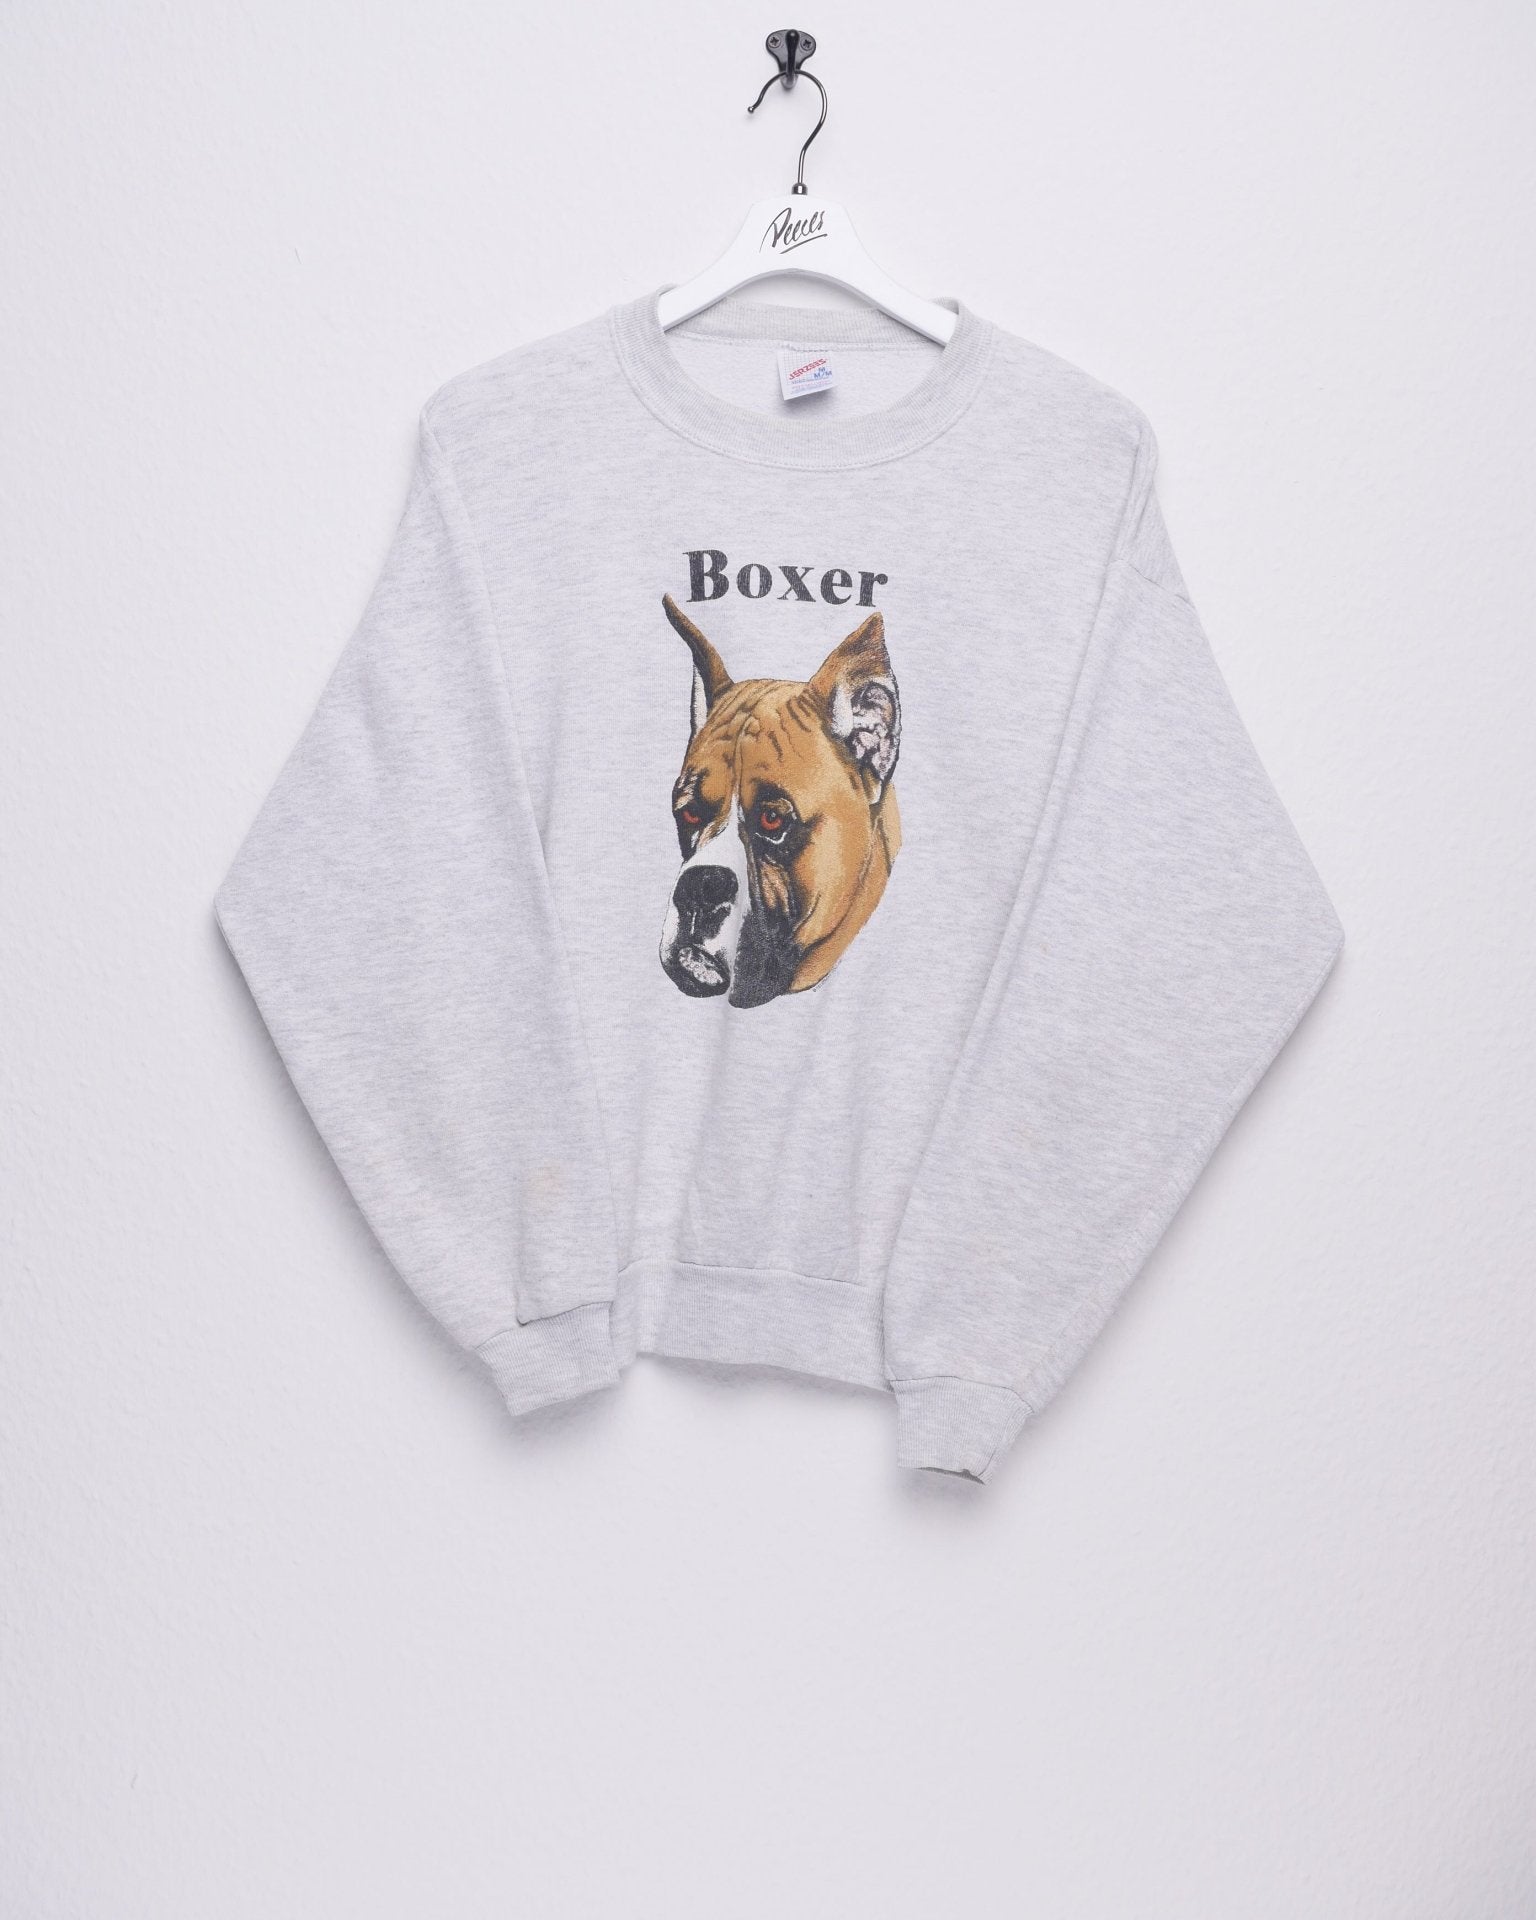 jerzees 'Boxer' printed Graphic Sweater - Peeces